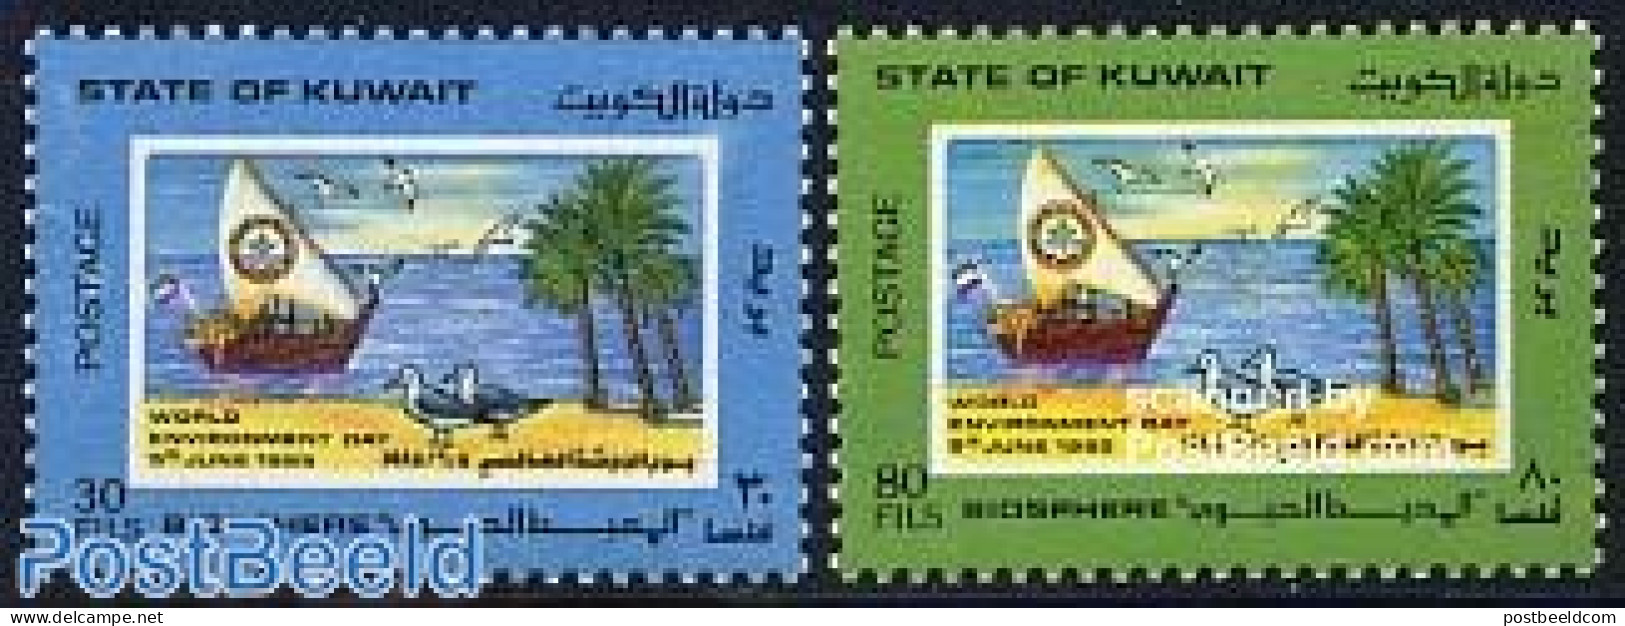 Kuwait 1985 Environment Day 2v, Mint NH, Nature - Transport - Birds - Environment - Trees & Forests - Ships And Boats - Umweltschutz Und Klima